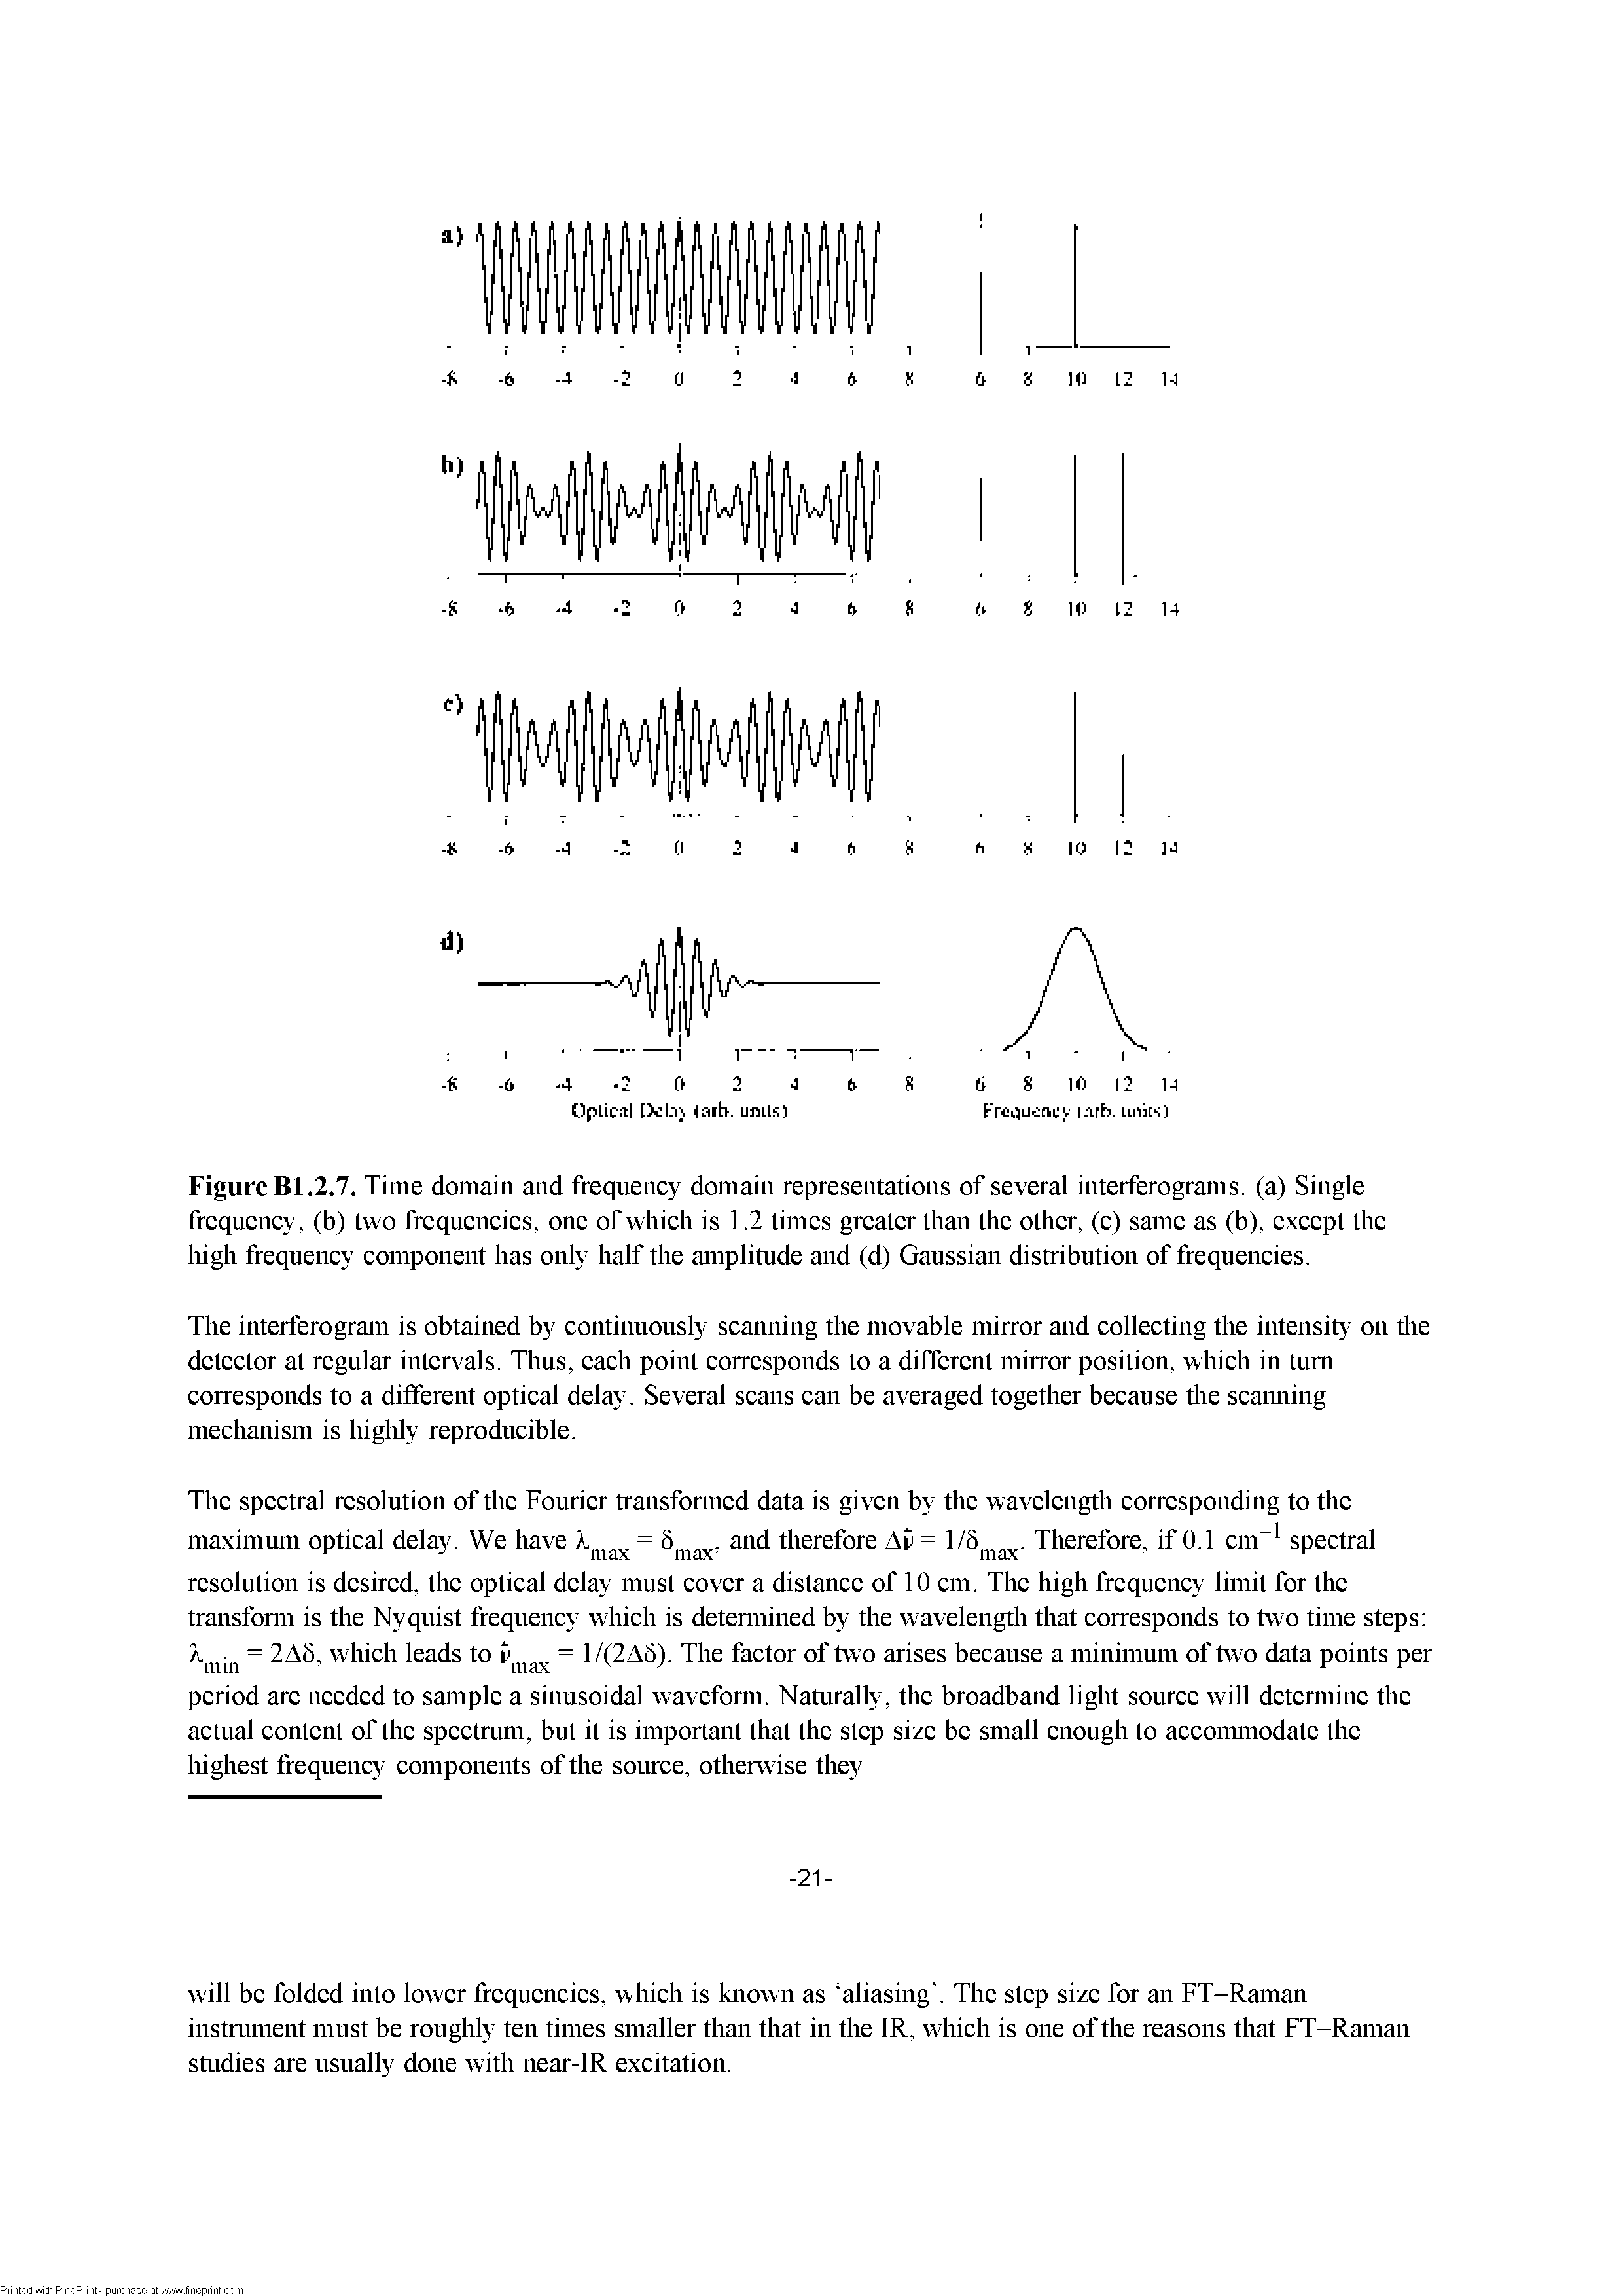 Figure Bl.2.7. Time domain and frequency domain representations of several interferograms. (a) Single frequency, (b) two frequencies, one of which is 1.2 times greater than the other, (c) same as (b), except the high frequency component has only half the amplitude and (d) Gaussian distribution of frequencies.